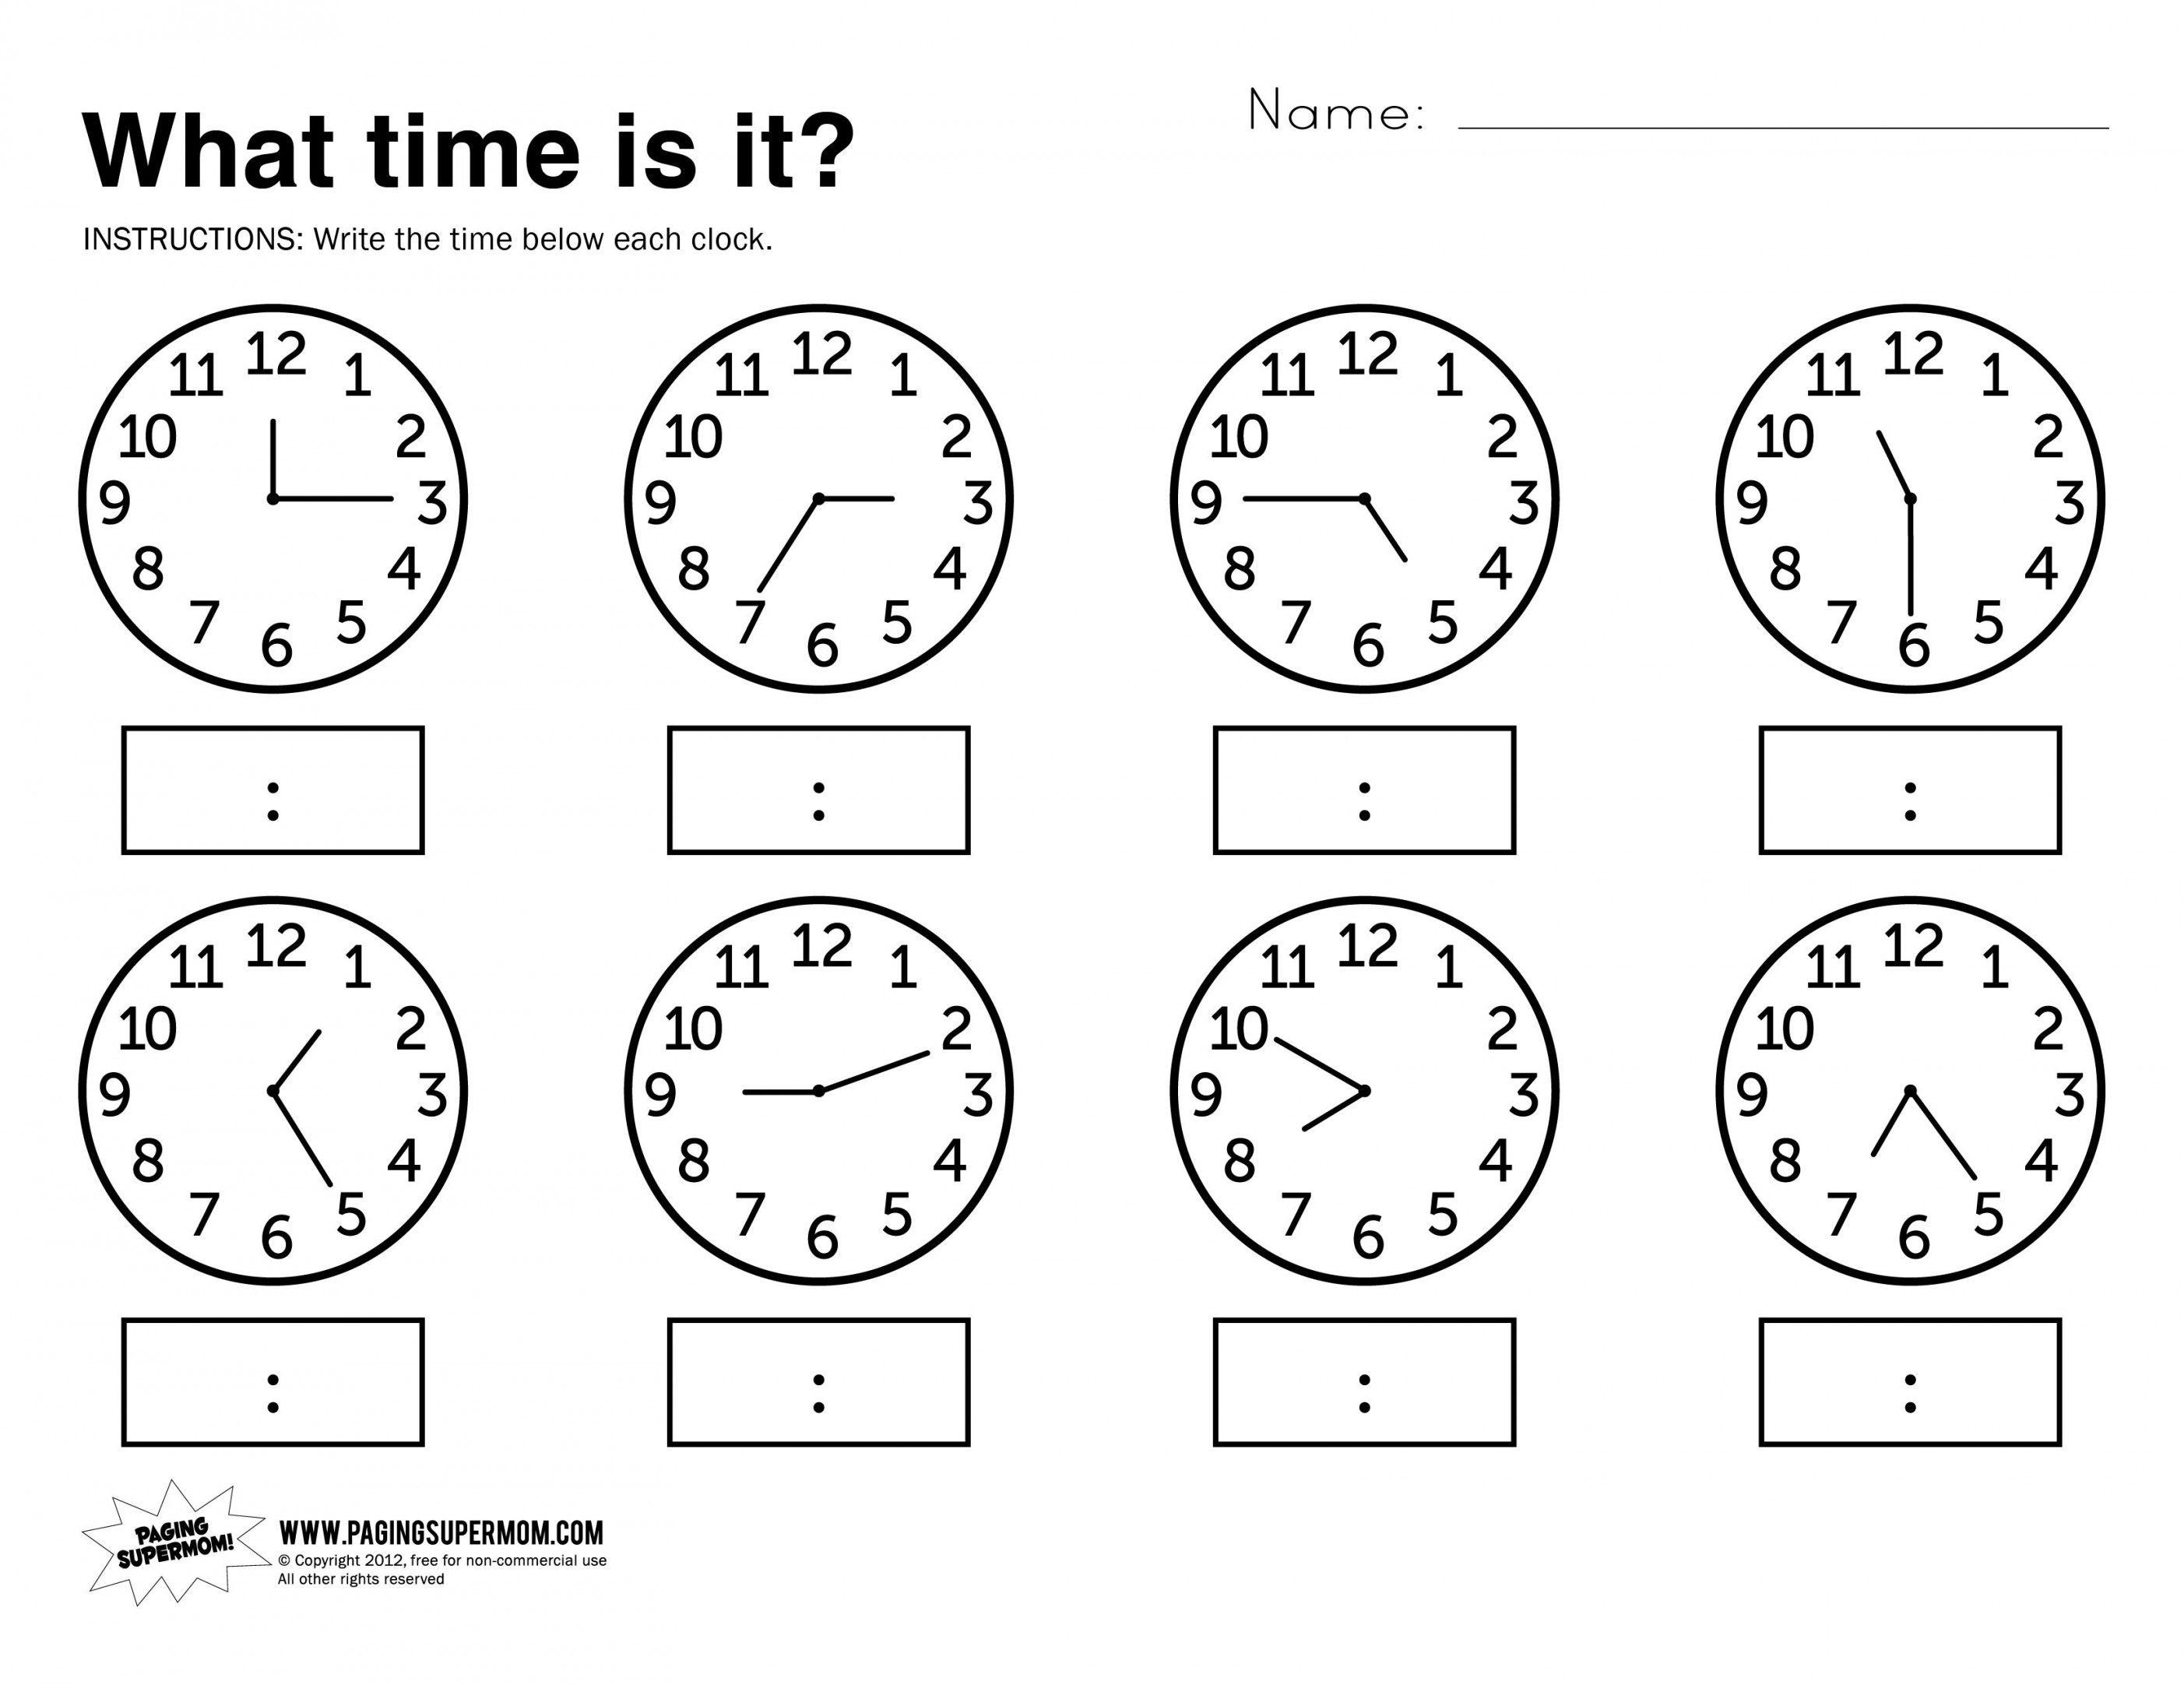 Telling Time Worksheets Grade 3 | Lostranquillos - Free Printable | Printable Time Worksheets Grade 3